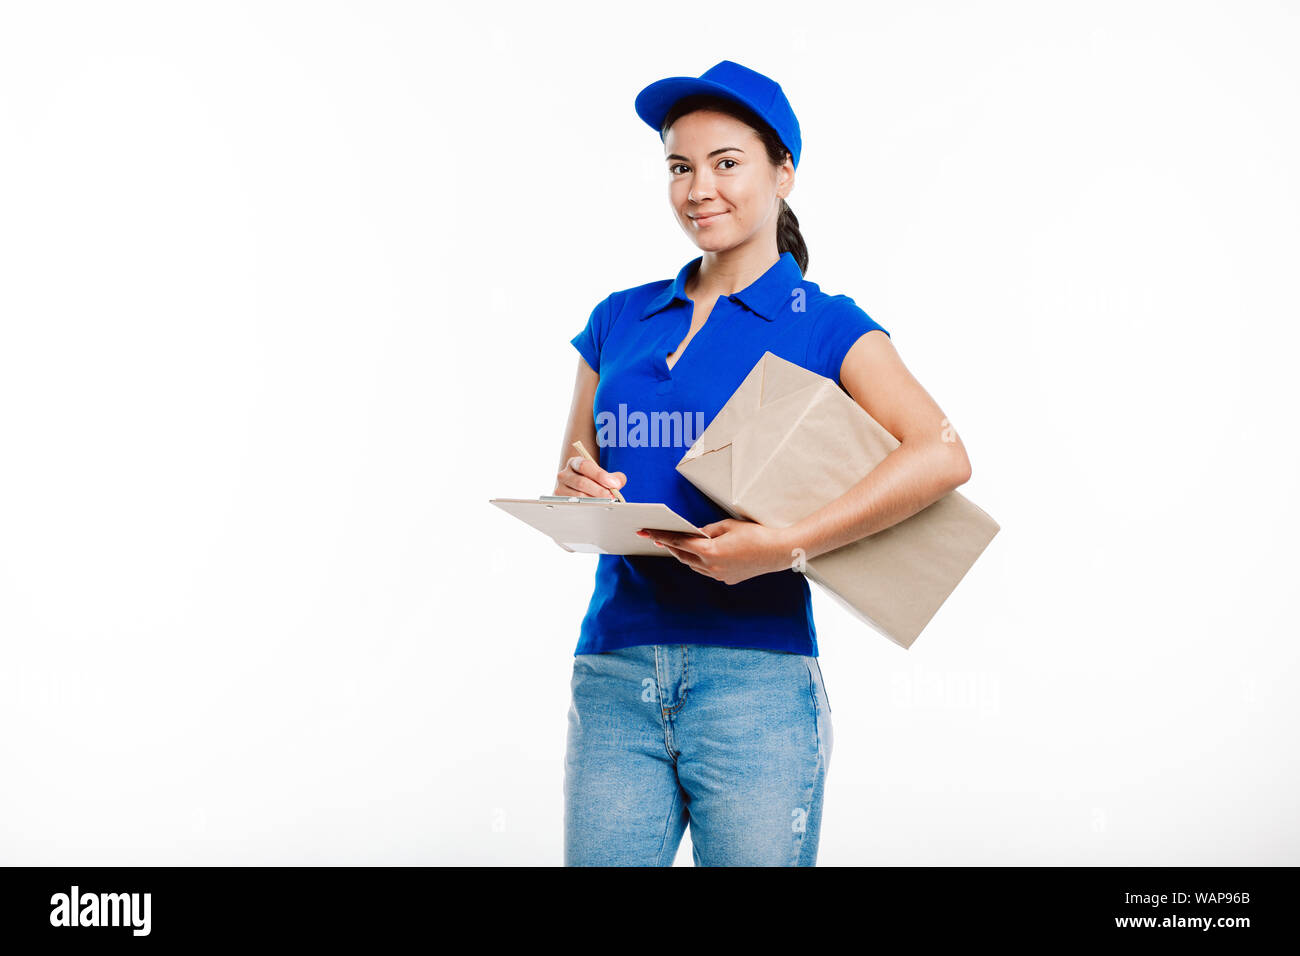 Girl working in the delivery wears blue uniform as she signes documents for the parcel she holds. Stock Photo